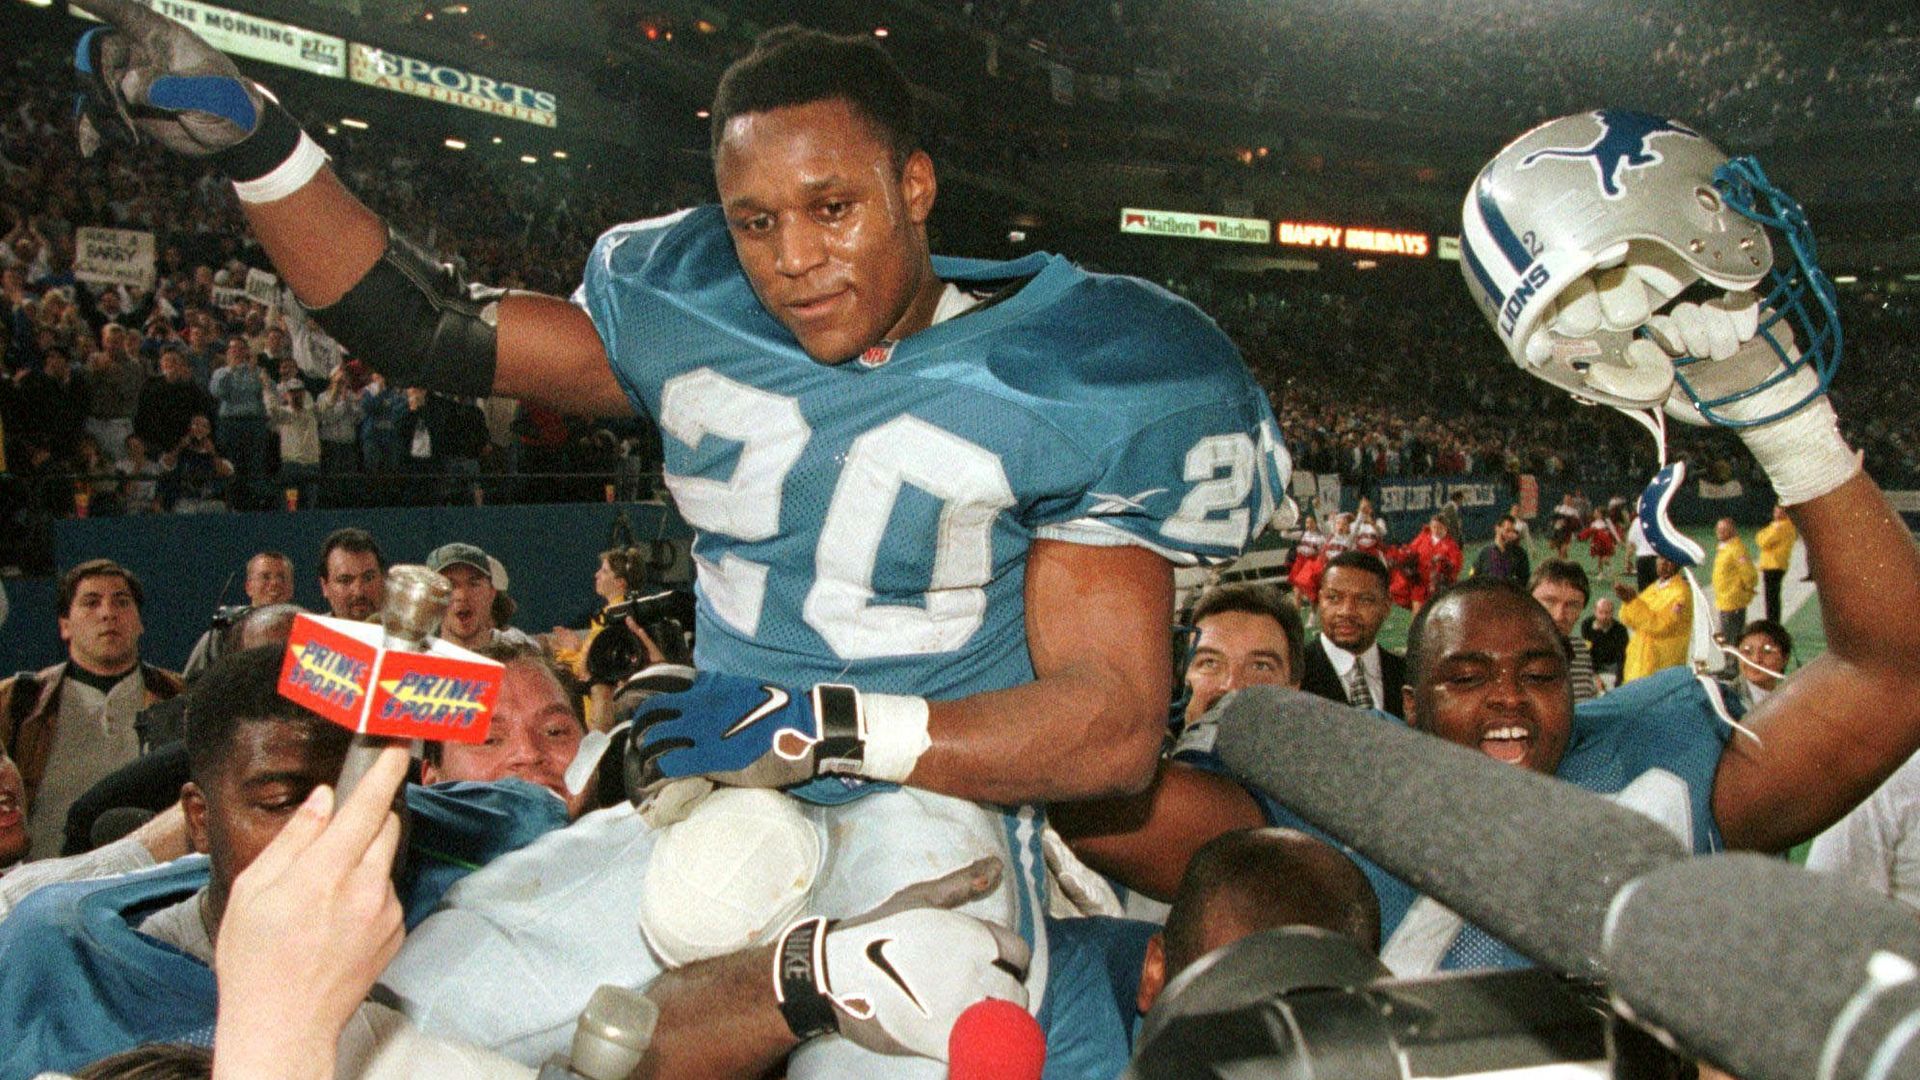 Barry Sanders is carried off of the field at the Silverdome by his teammates after he rushed for over 2,000 yards in a season in 1997.